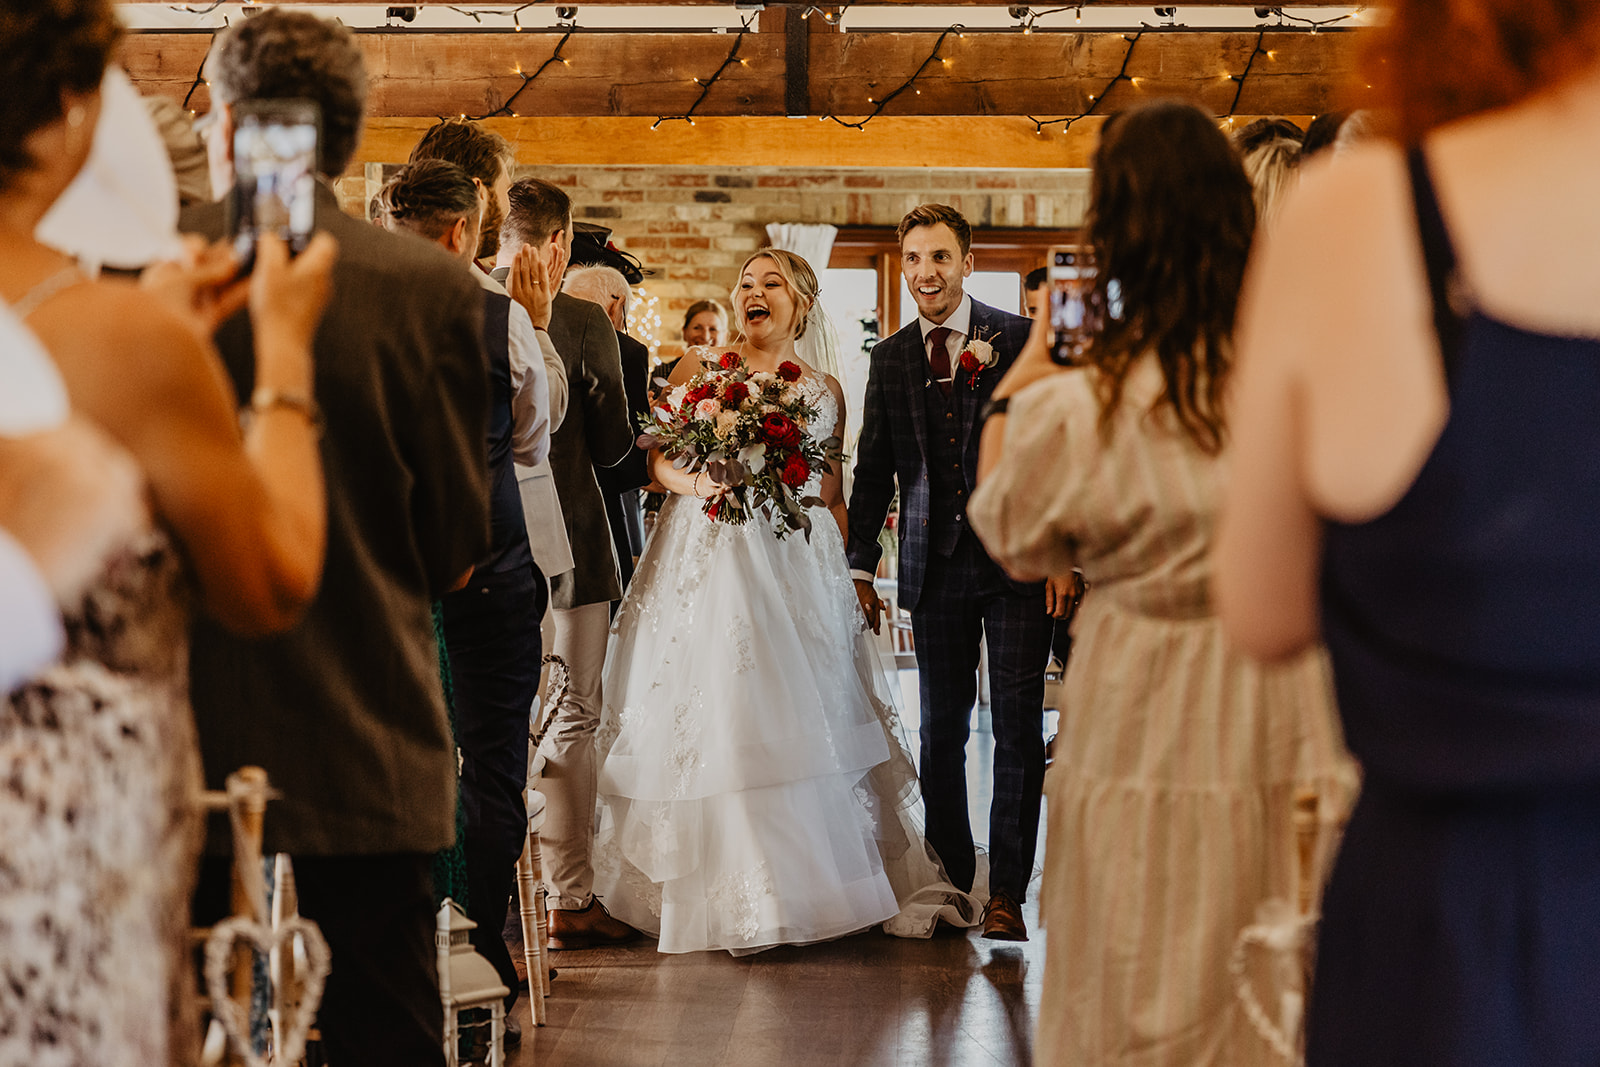 Bride and groom walk down the aisle at a wedding at Long Furlong Barn, Sussex. By OliveJoy Photography.